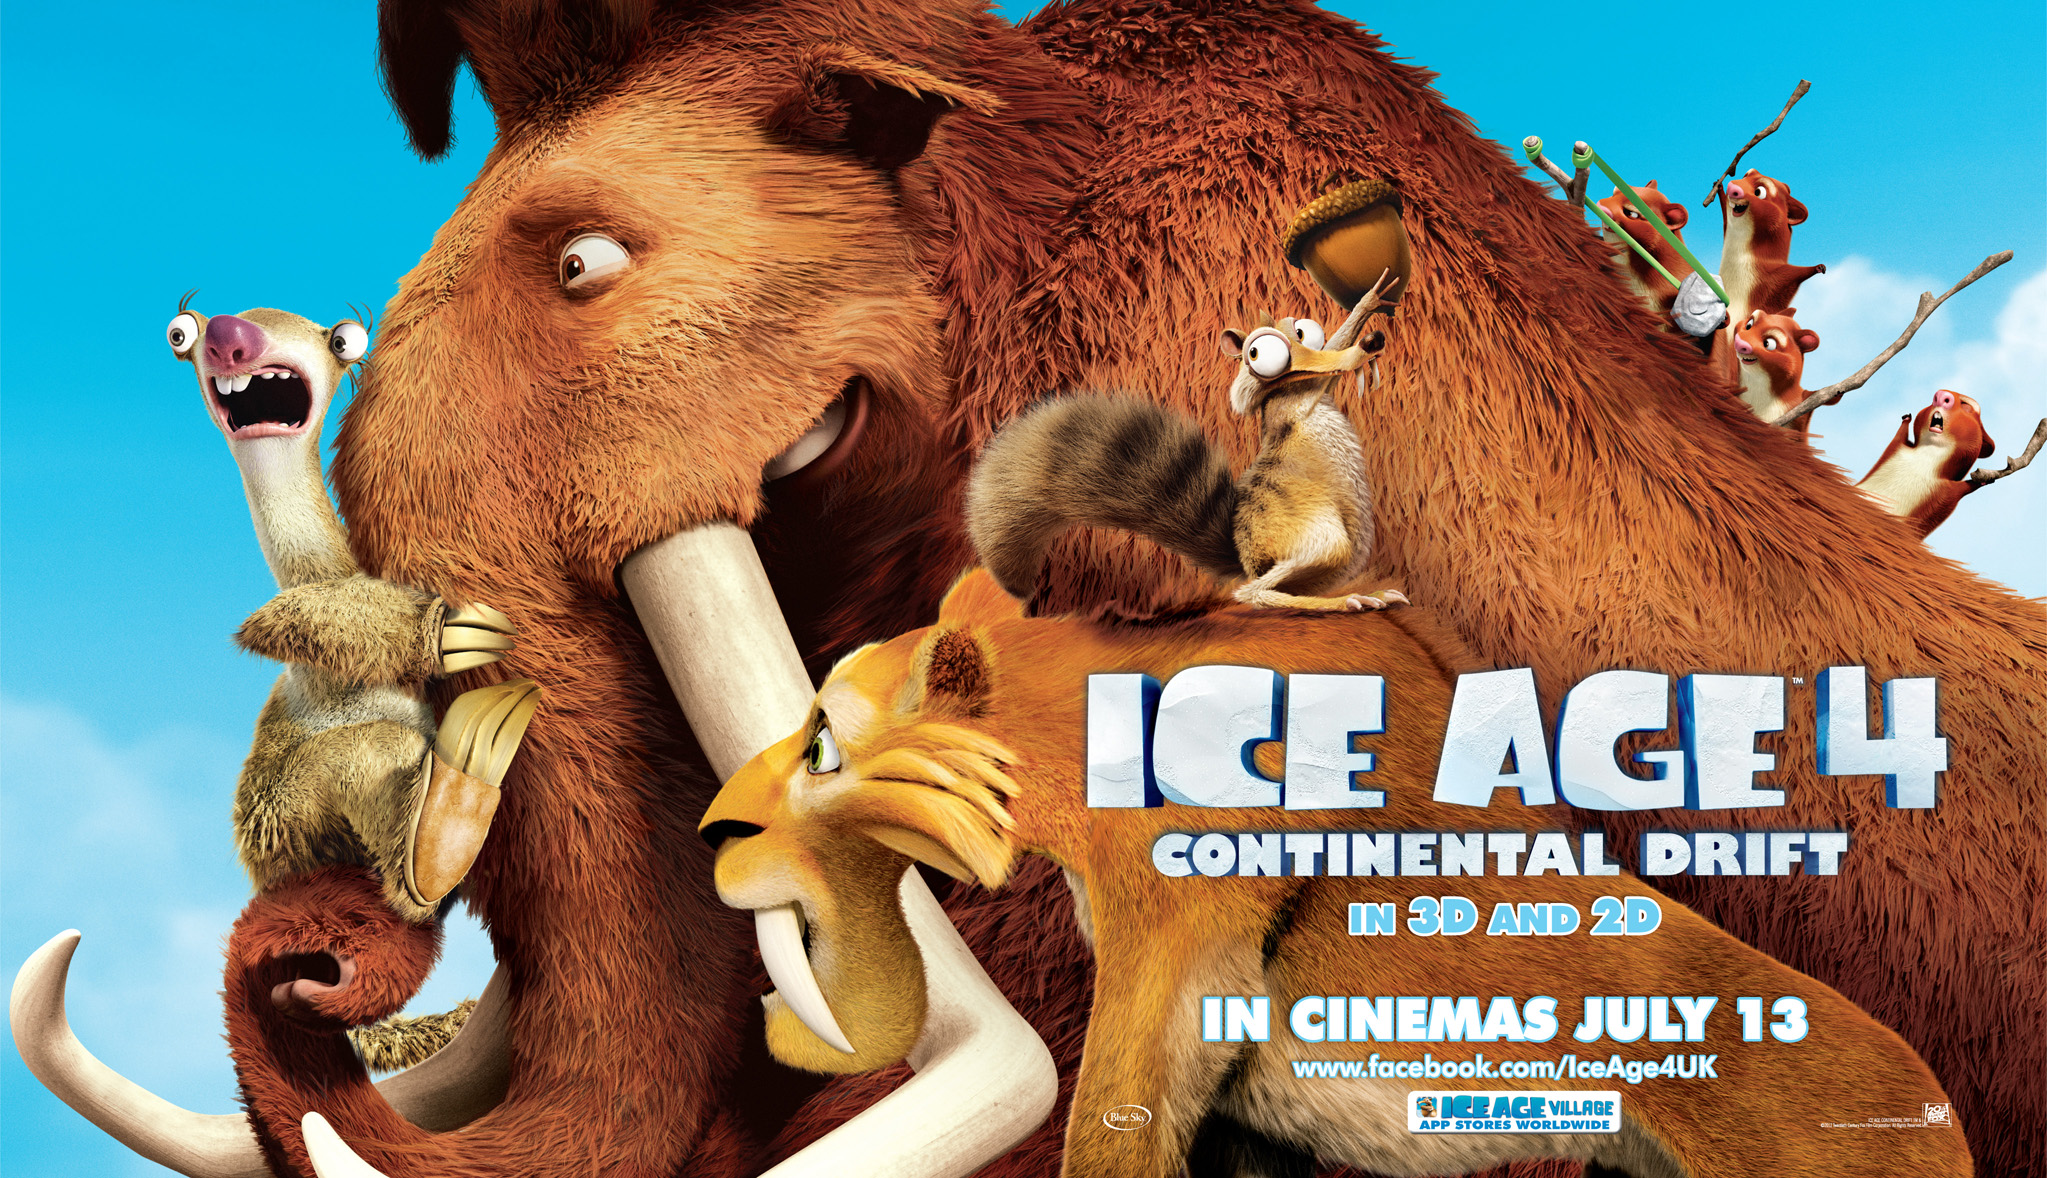 Ice Age: Continental Drift Posters and Banners